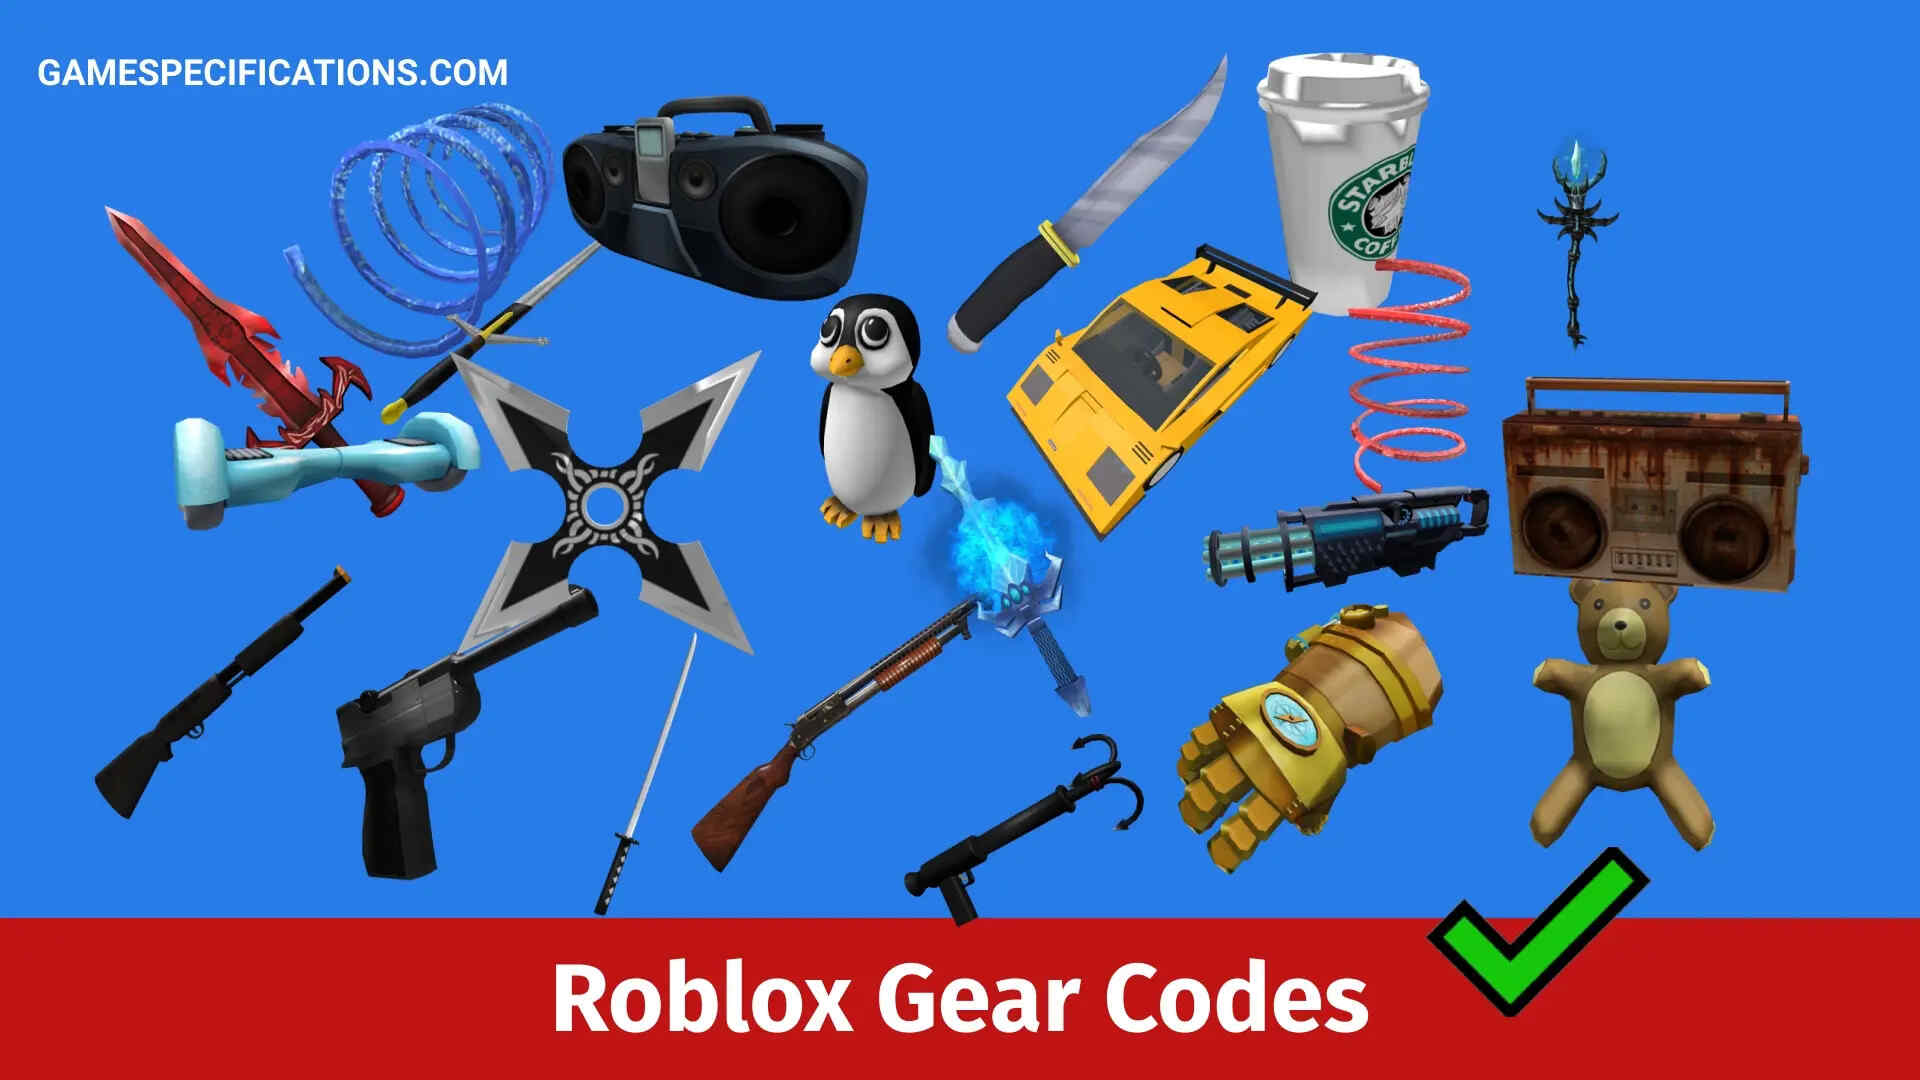 If you could have any Roblox gear in real life what would it be? : r/roblox